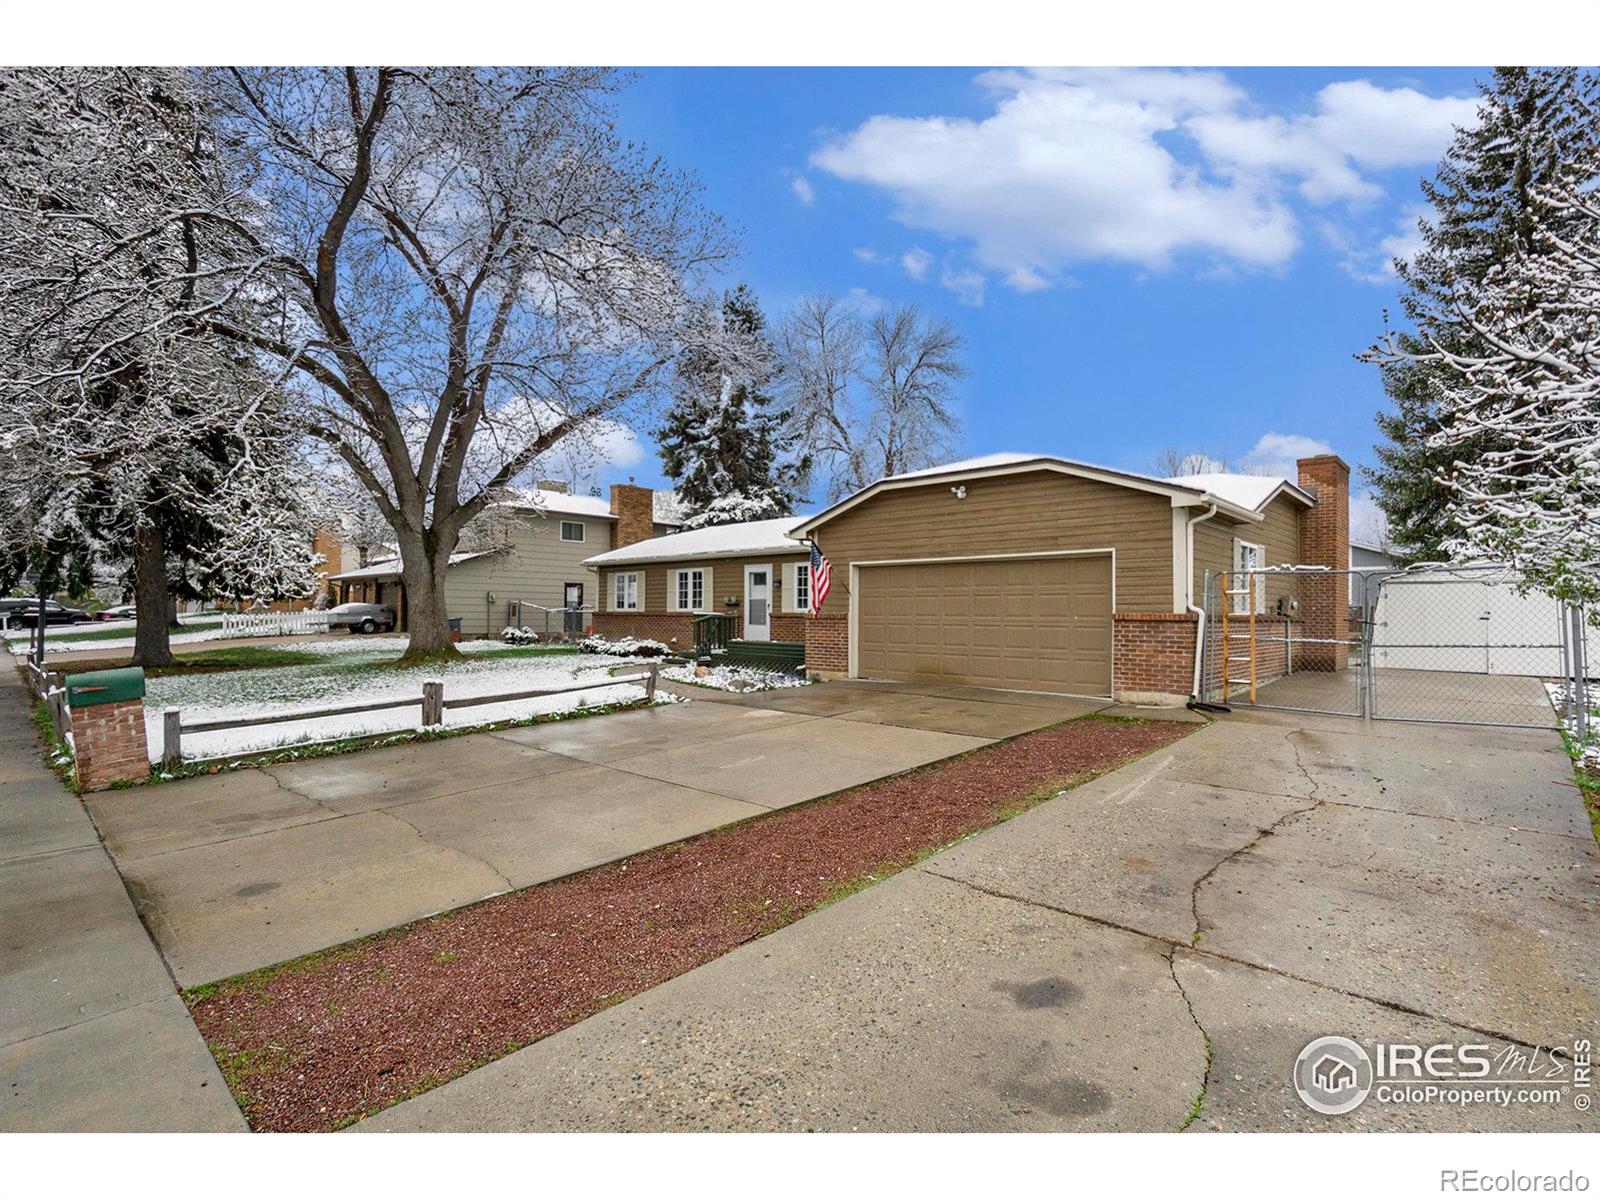 Report Image for 3001  Southmoor Court,Fort Collins, Colorado